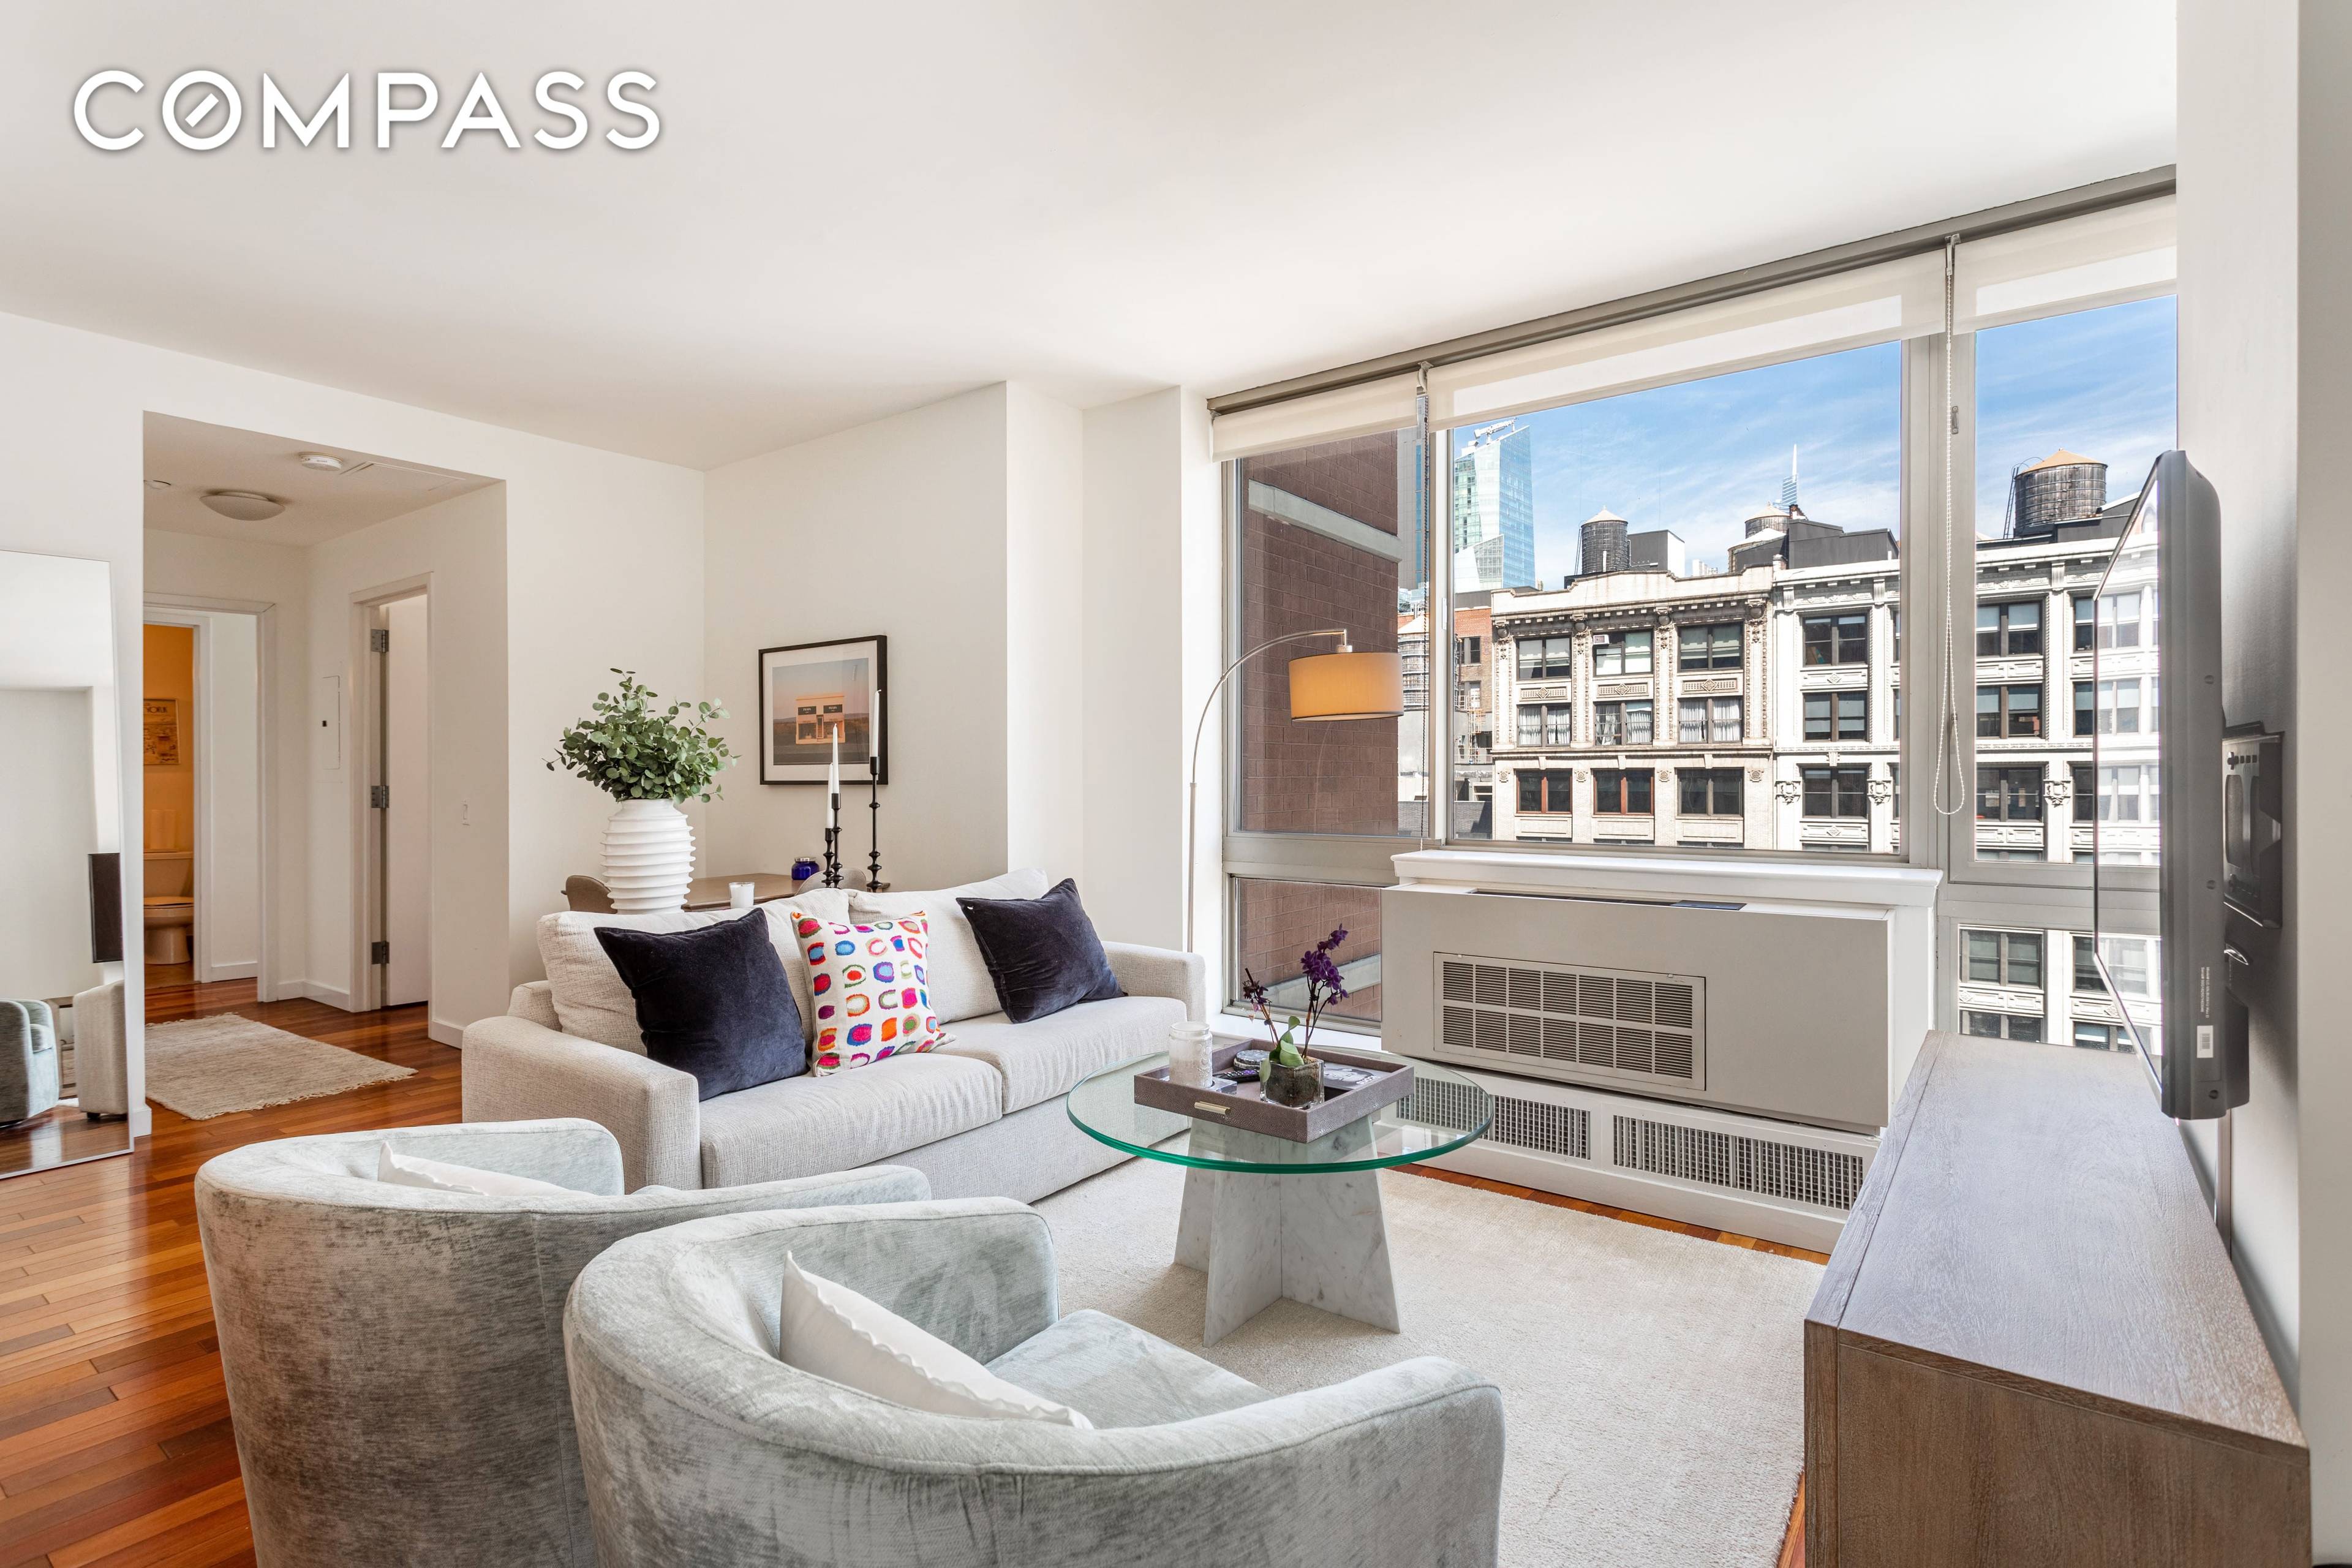 This stunning 2 bedroom, 2 bathroom corner apartment is located on the 14th floor, offering both North and Easter exposures that provide exceptional light throughout the day.